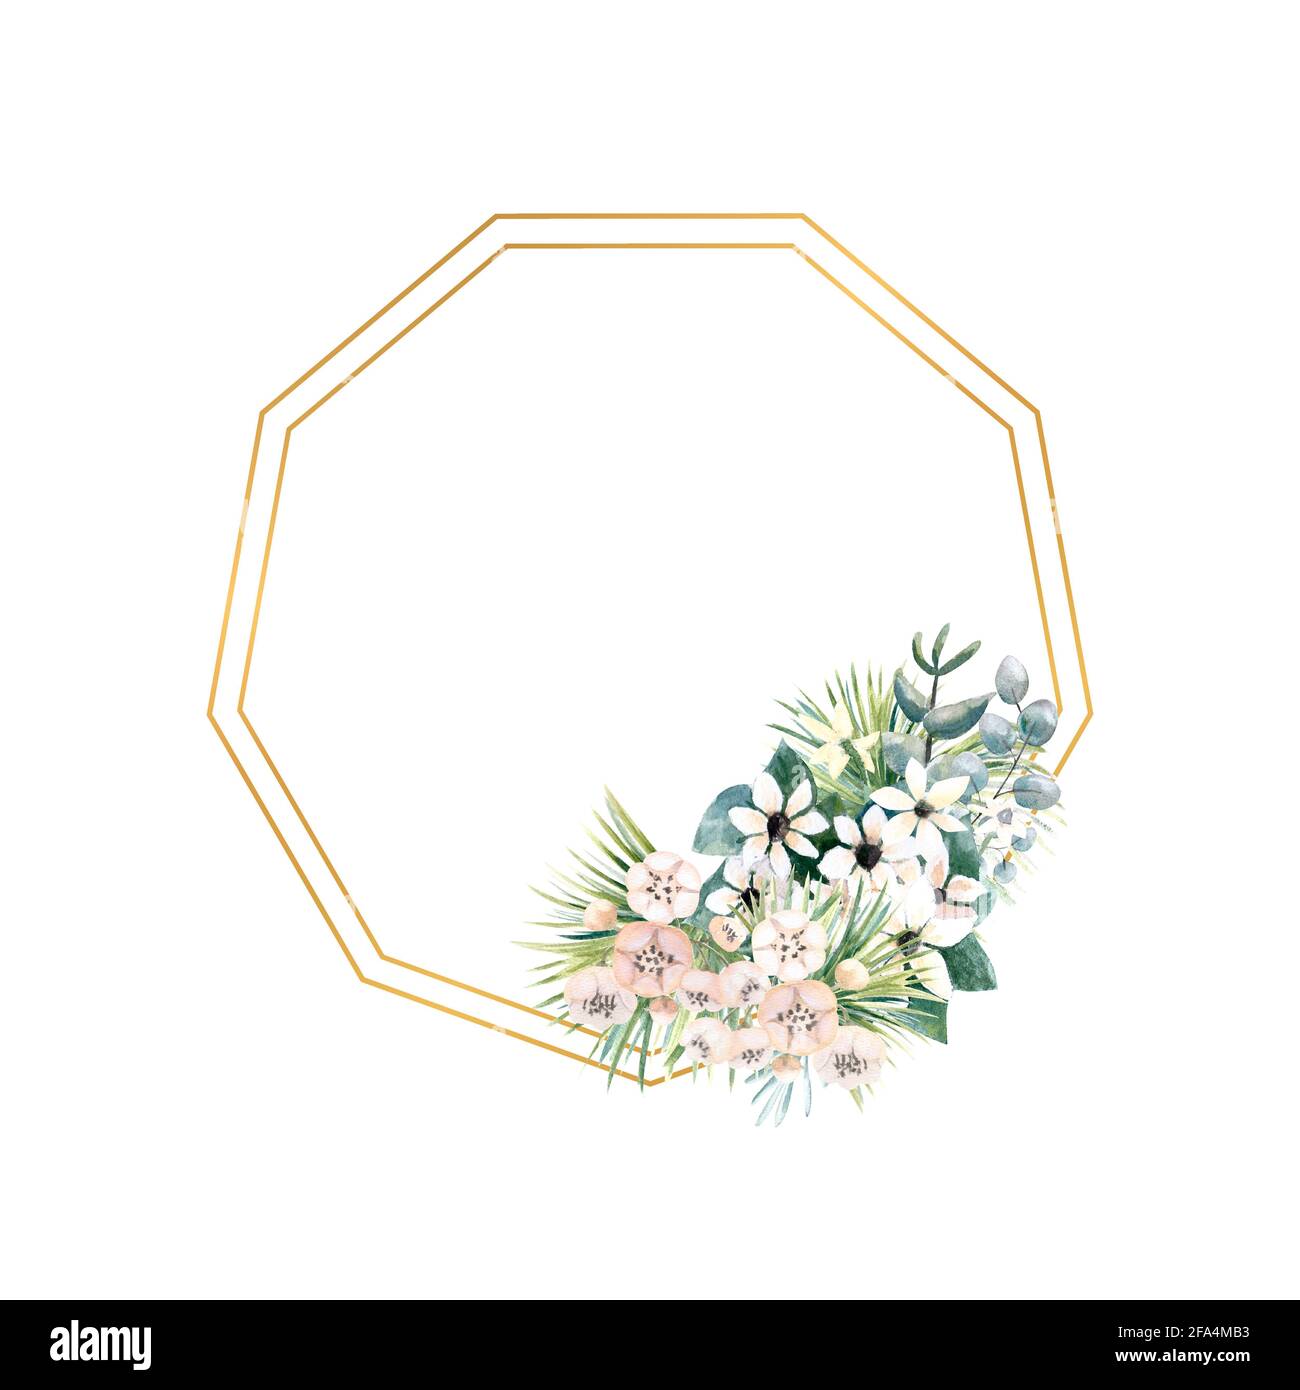 Hexagonal gold frame with small flowers of actinidia, bouvardia, tropical and palm leaves. Wedding bouquet in a frame for the design of a stylish Stock Photo